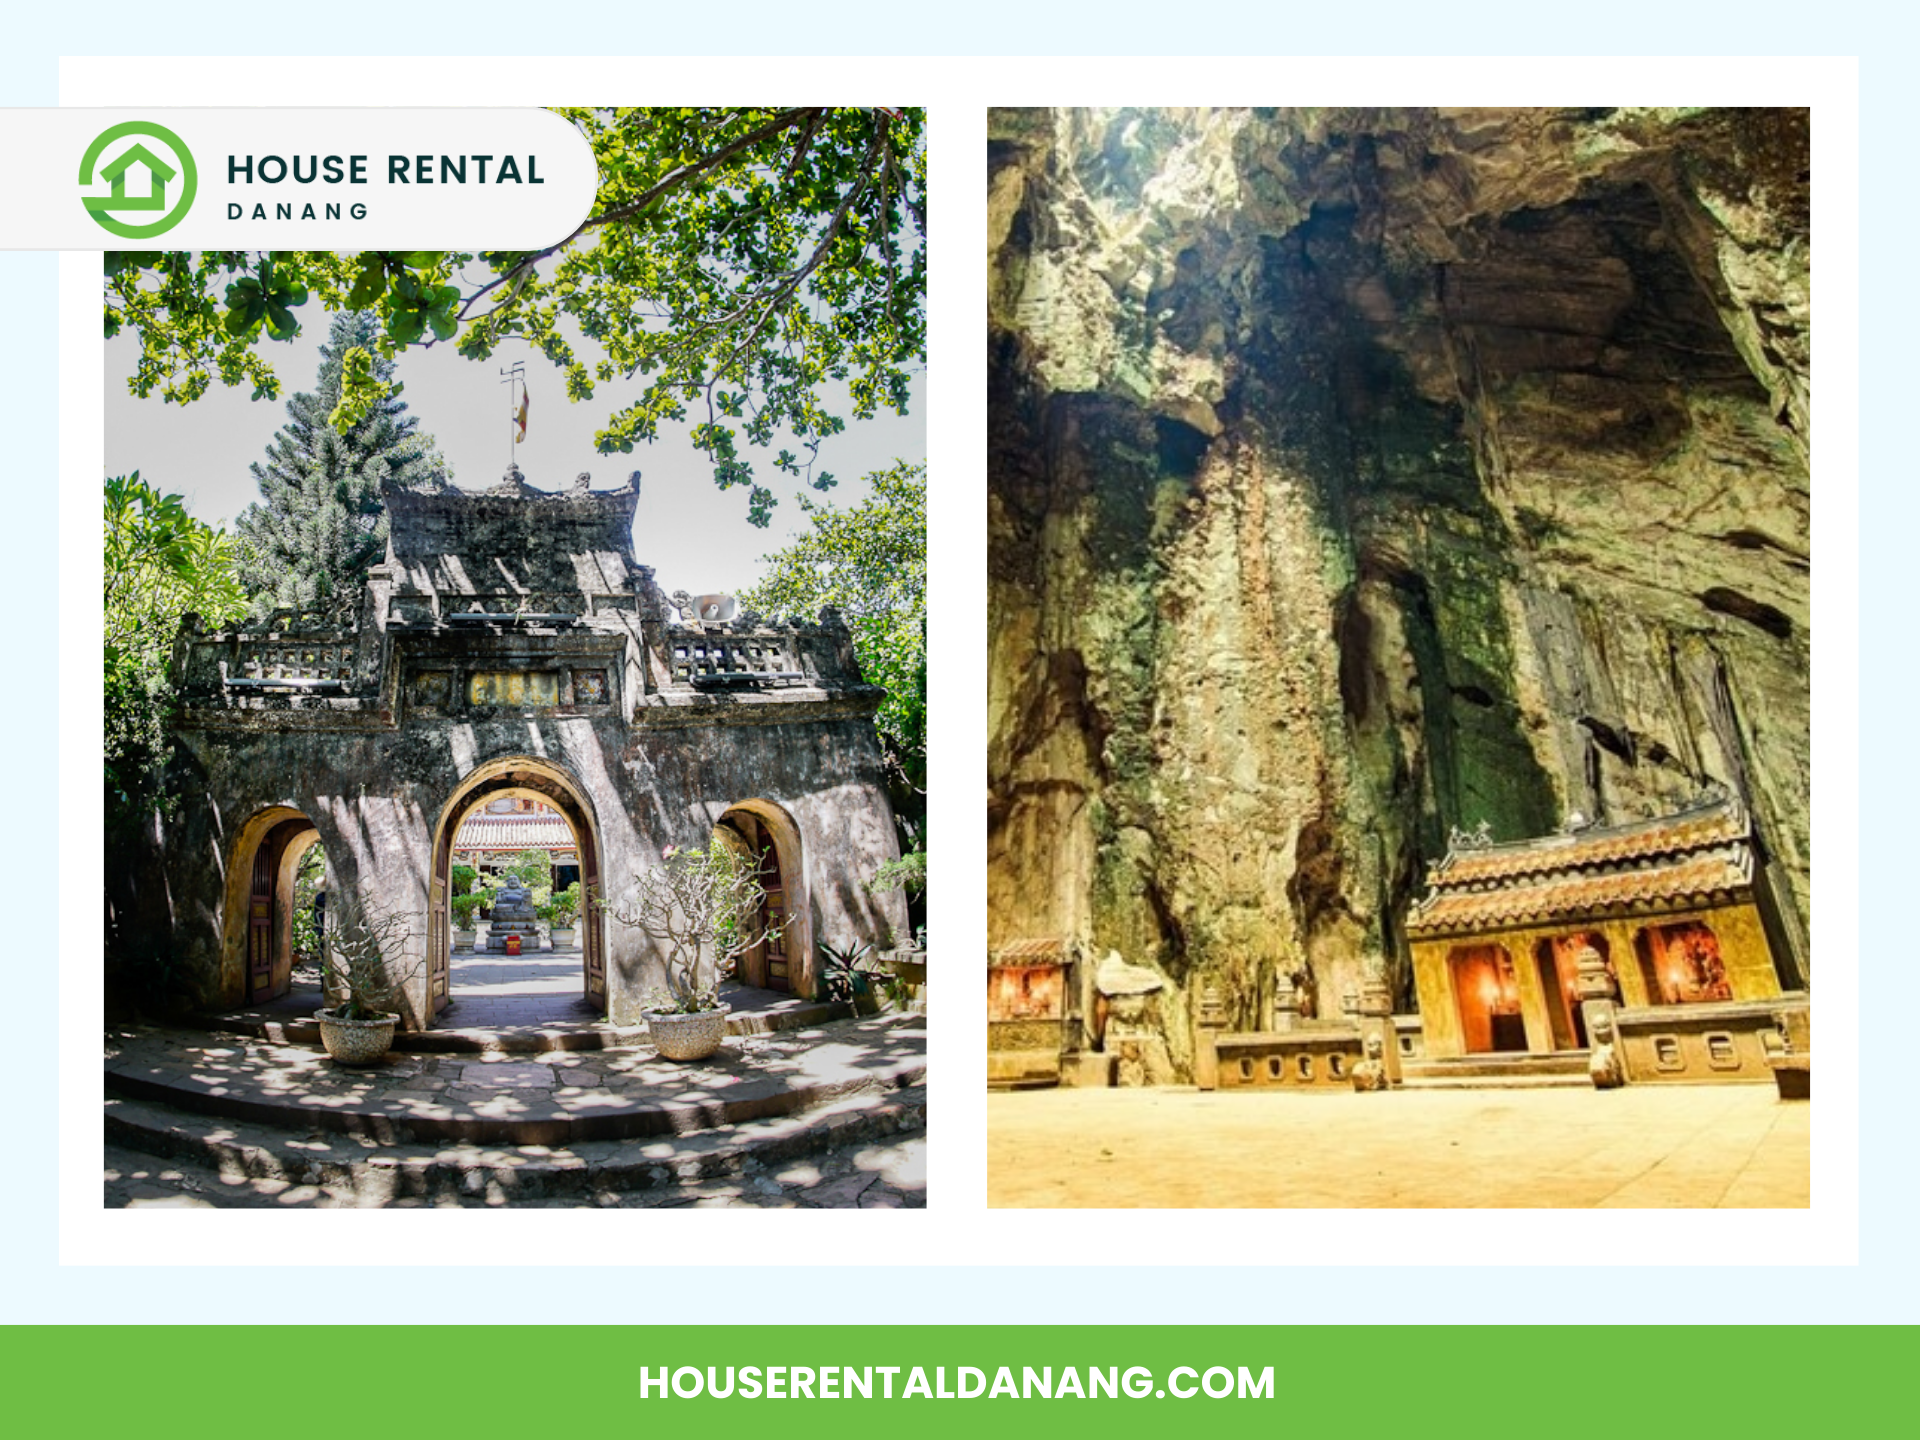 A stone entrance gate surrounded by foliage on the left, and an ancient temple inside a rocky cave on the right, both in Da Nang's Marble Mountains. House Rental Da Nang logo and URL are shown.